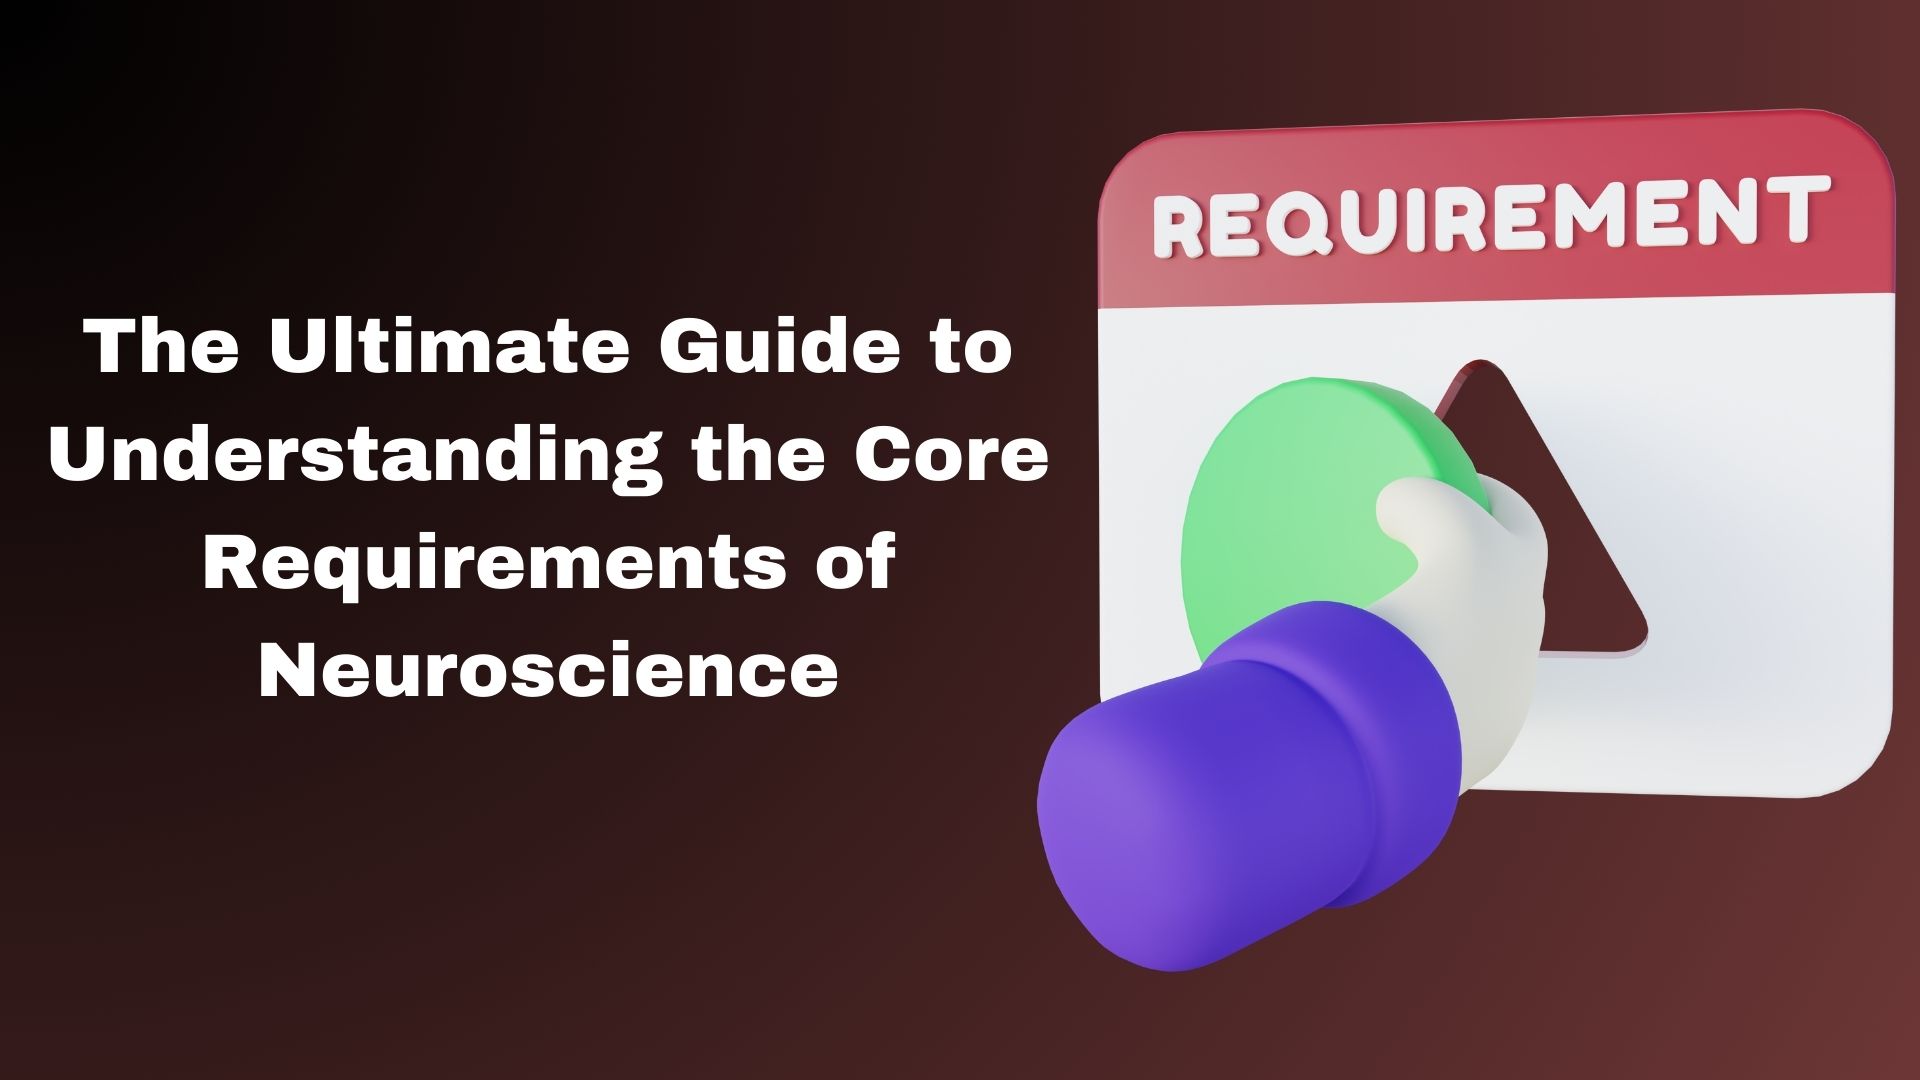 The Ultimate Guide to Understanding the Core Requirements of Neuroscience